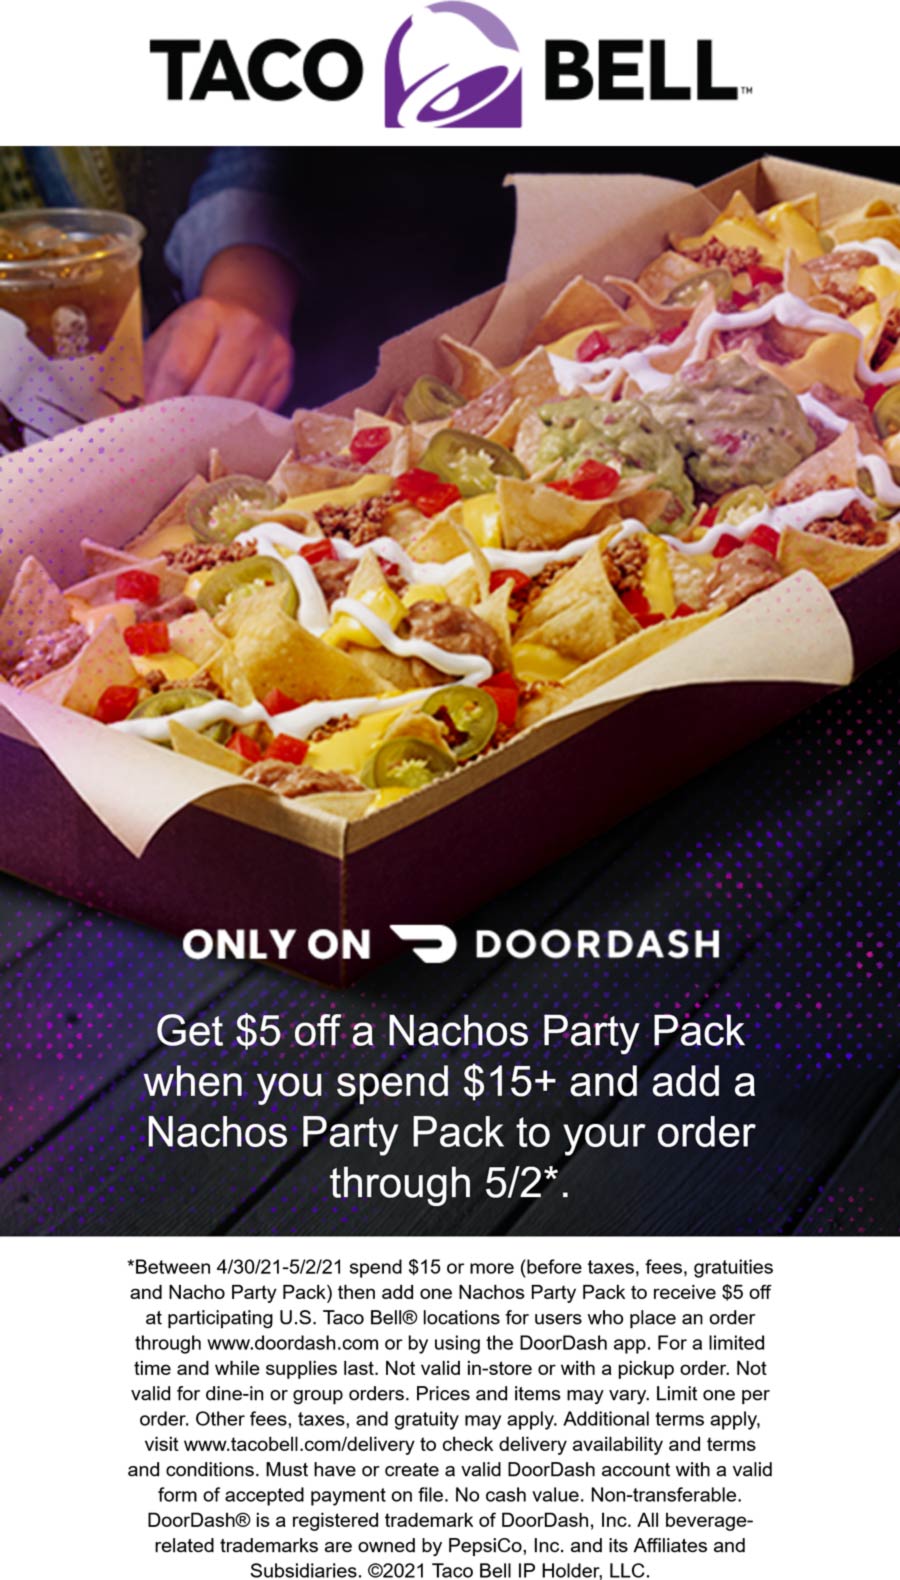 5-off-a-nacho-party-pack-on-15-delivery-at-taco-bell-tacobell-the